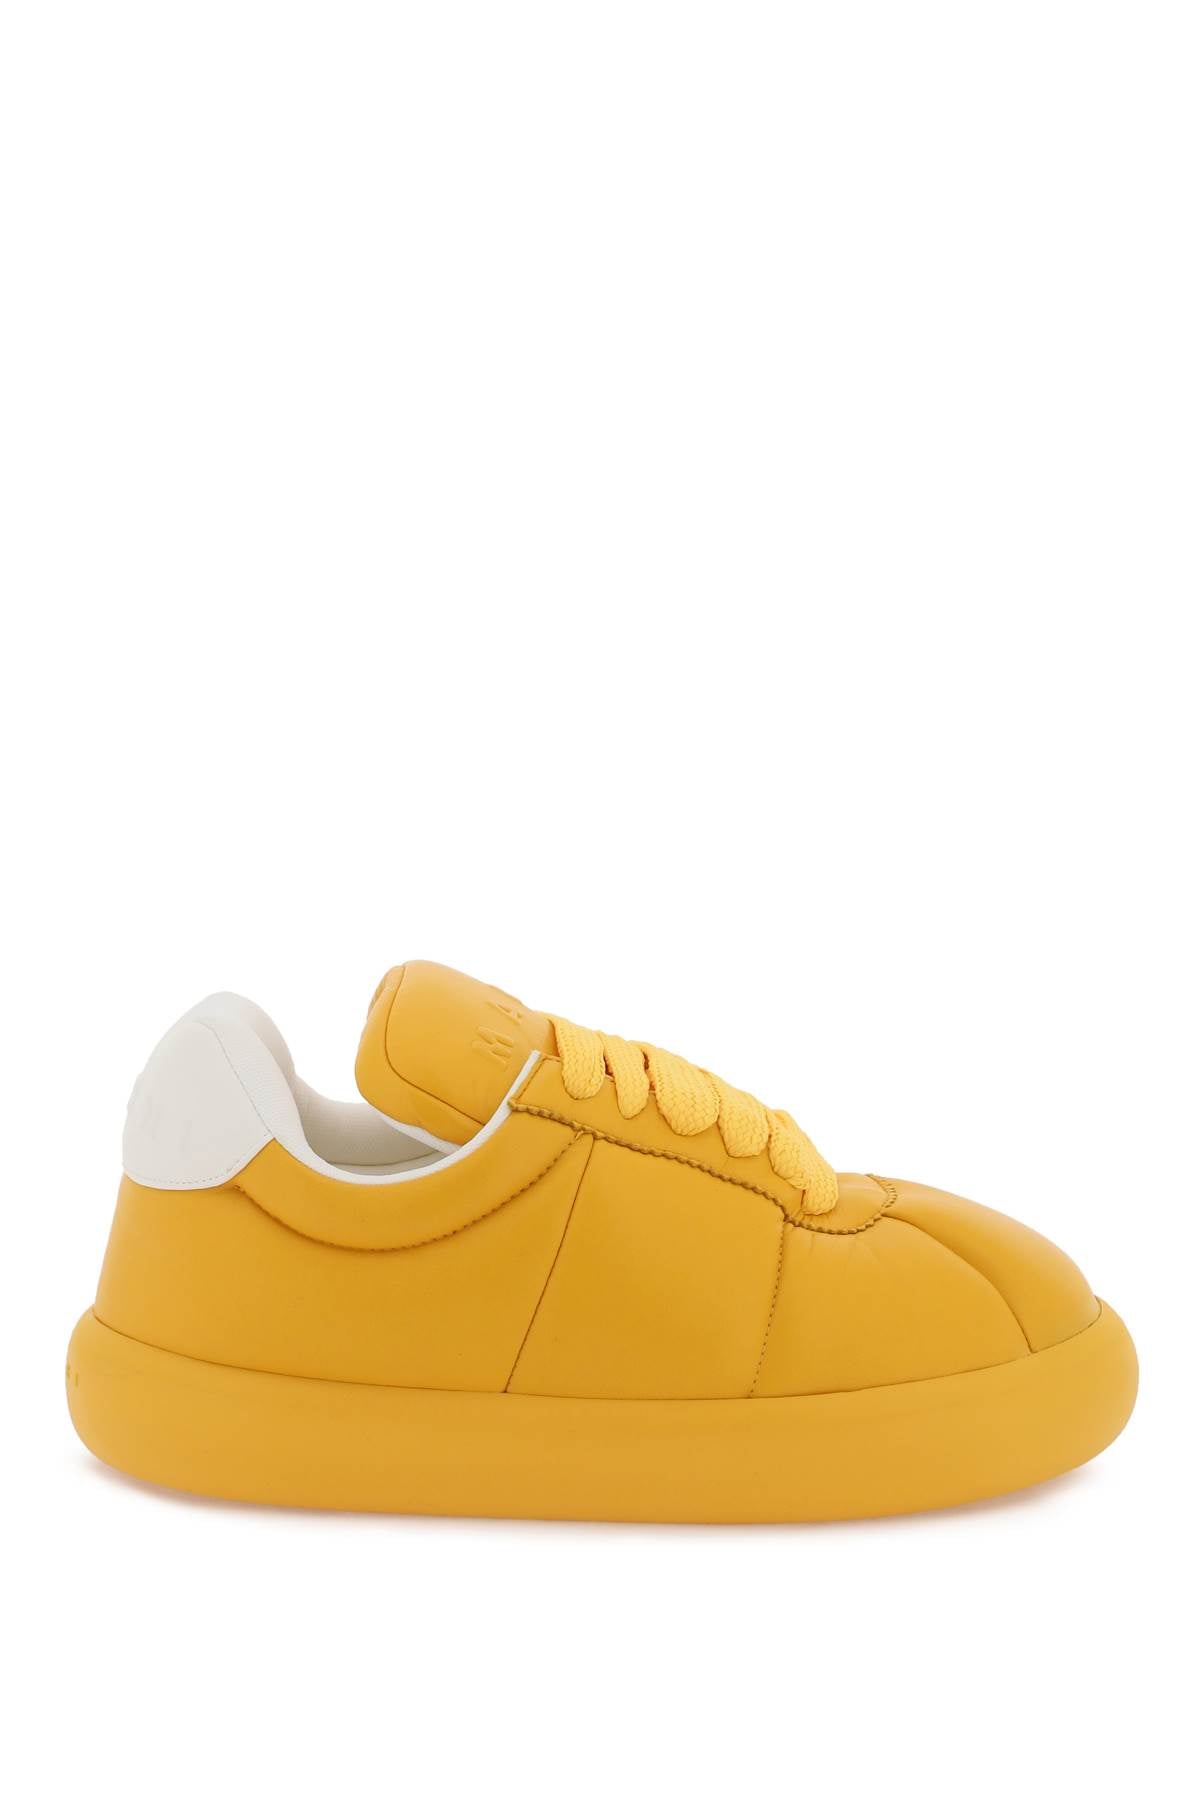 MARNI Modern and edgy leather sneakers for men - stylish and comfortable